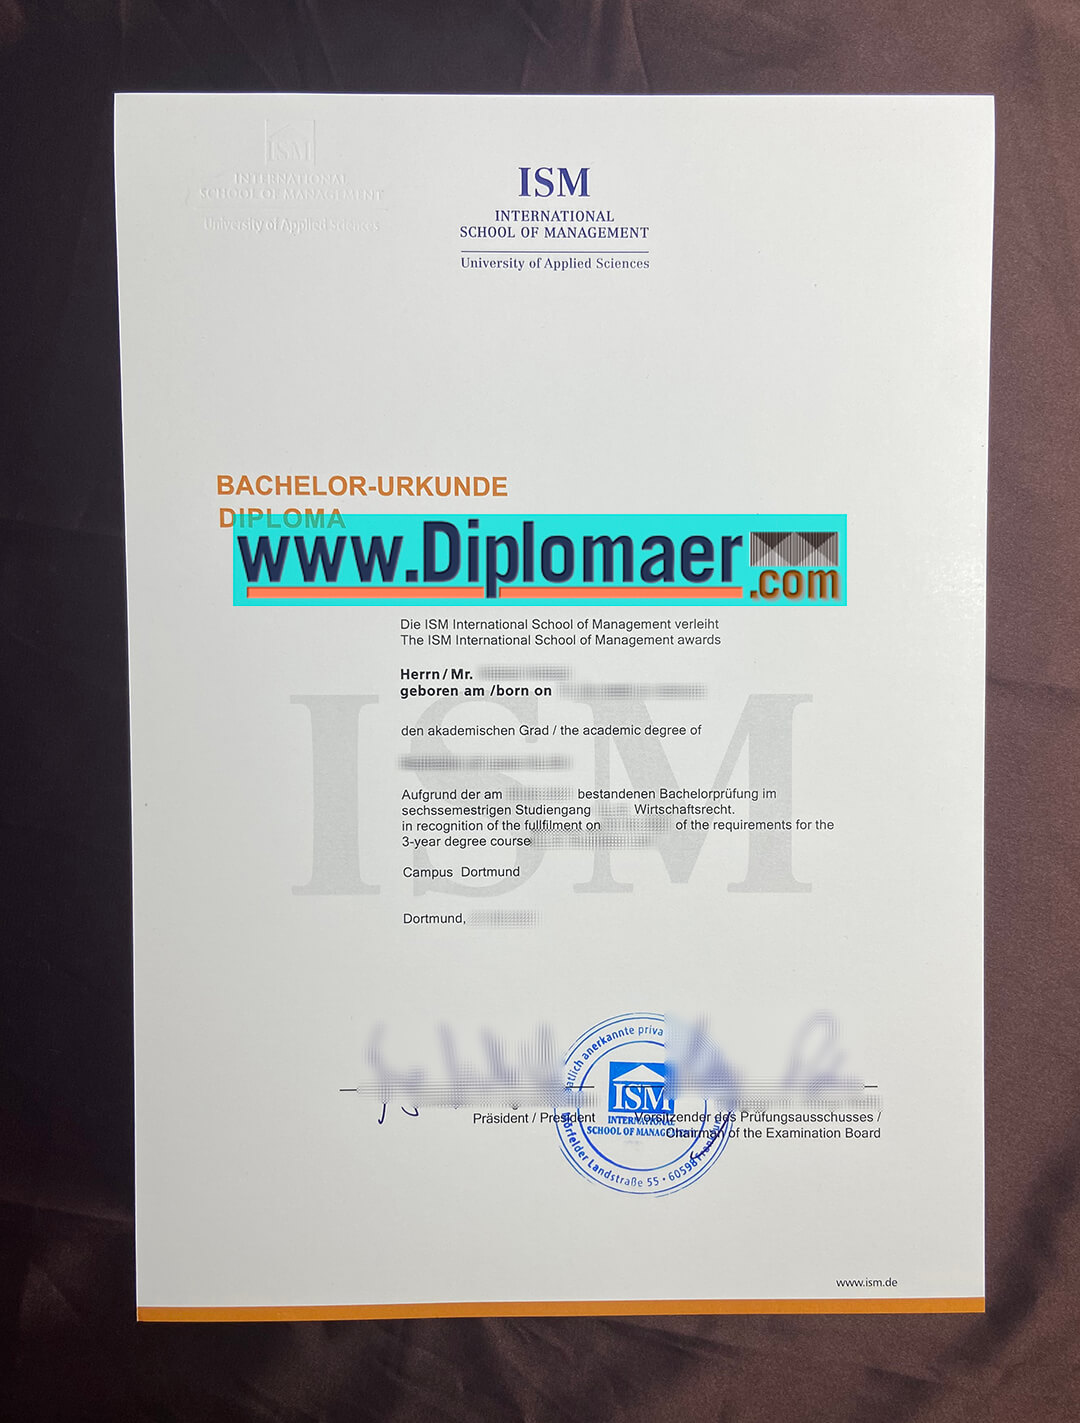 ISM Fake Diploma - What is the use of Dortmund International School of Management certificate？